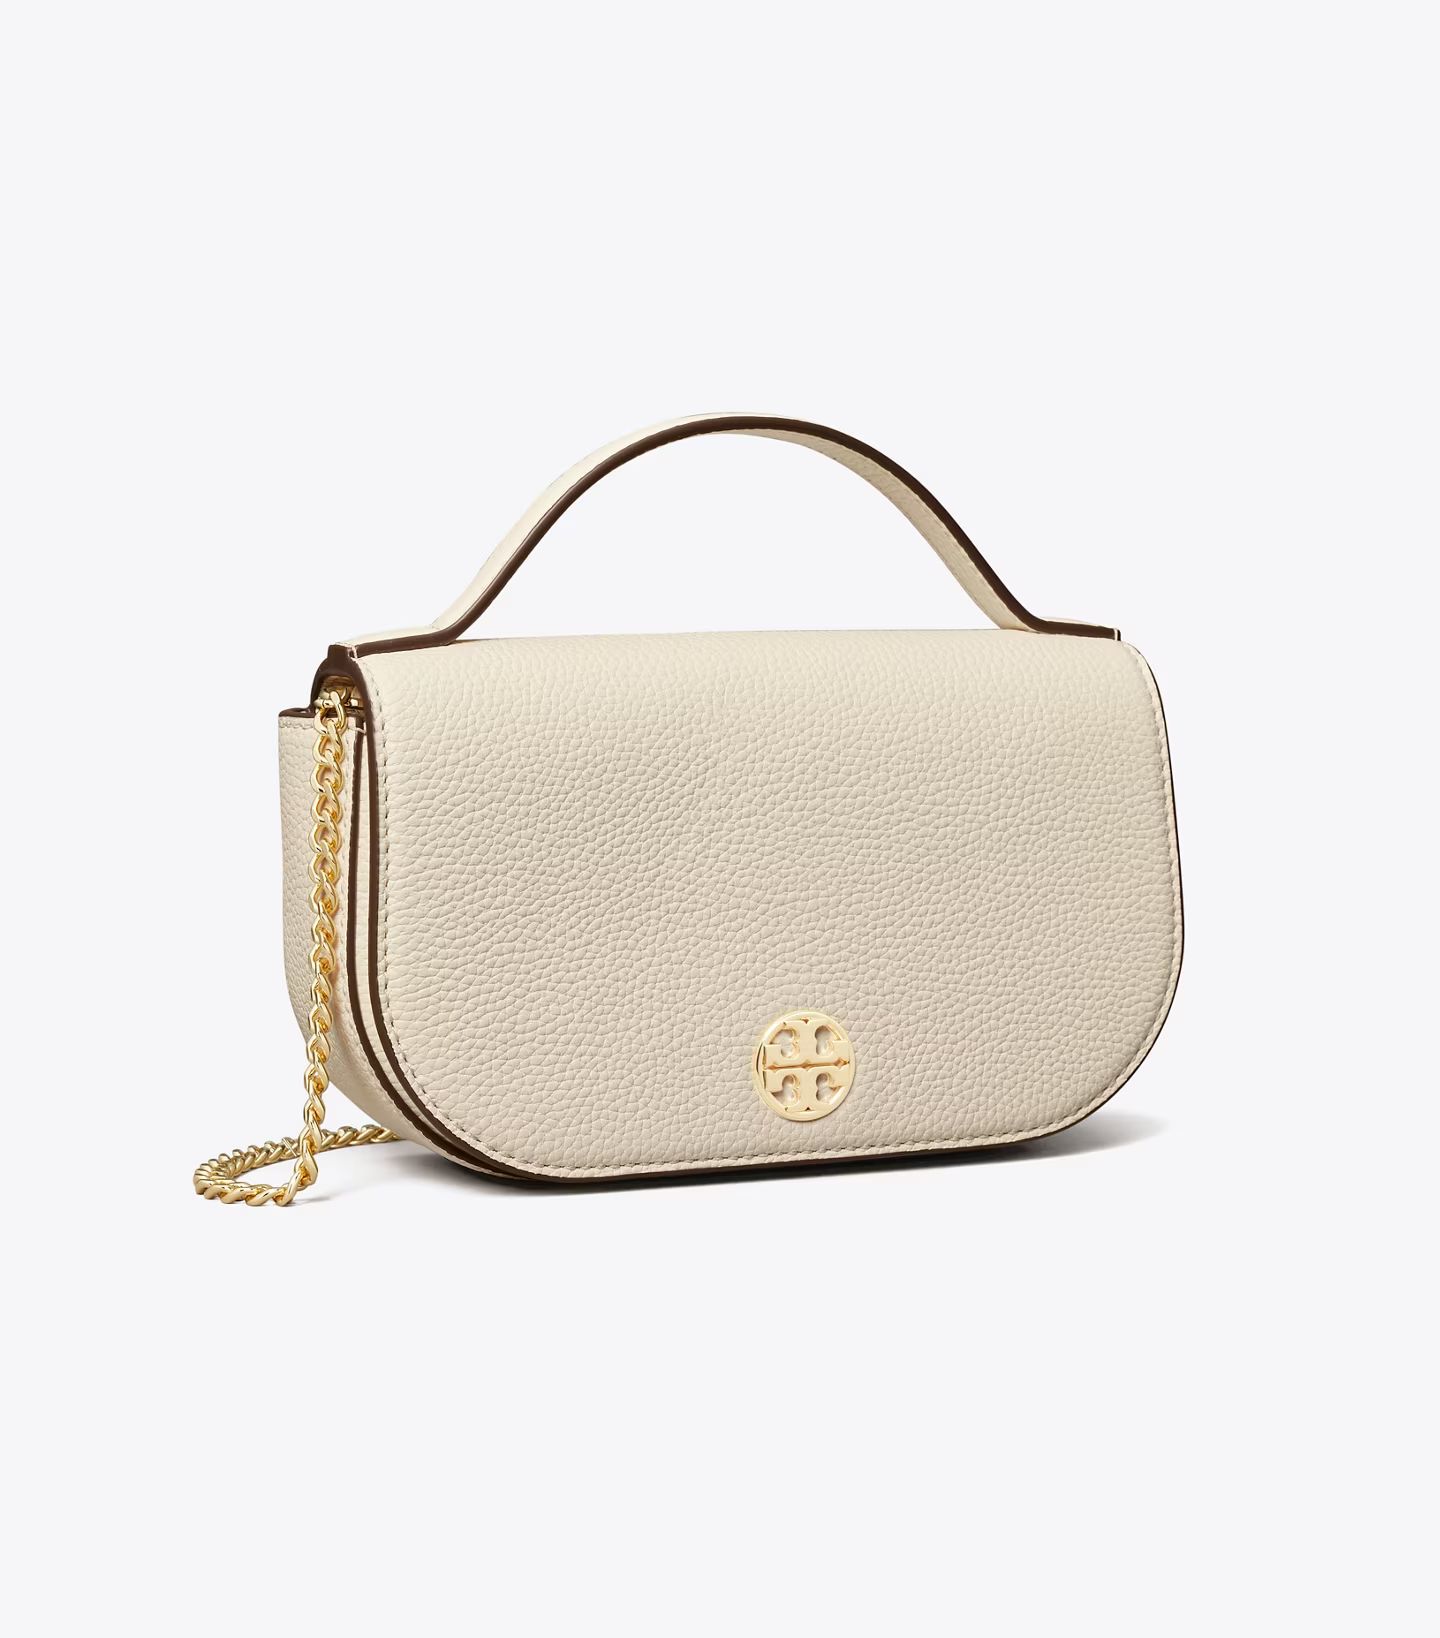 EXCLUSIVE: LIMITED-EDITION CROSSBODY | Tory Burch (US)